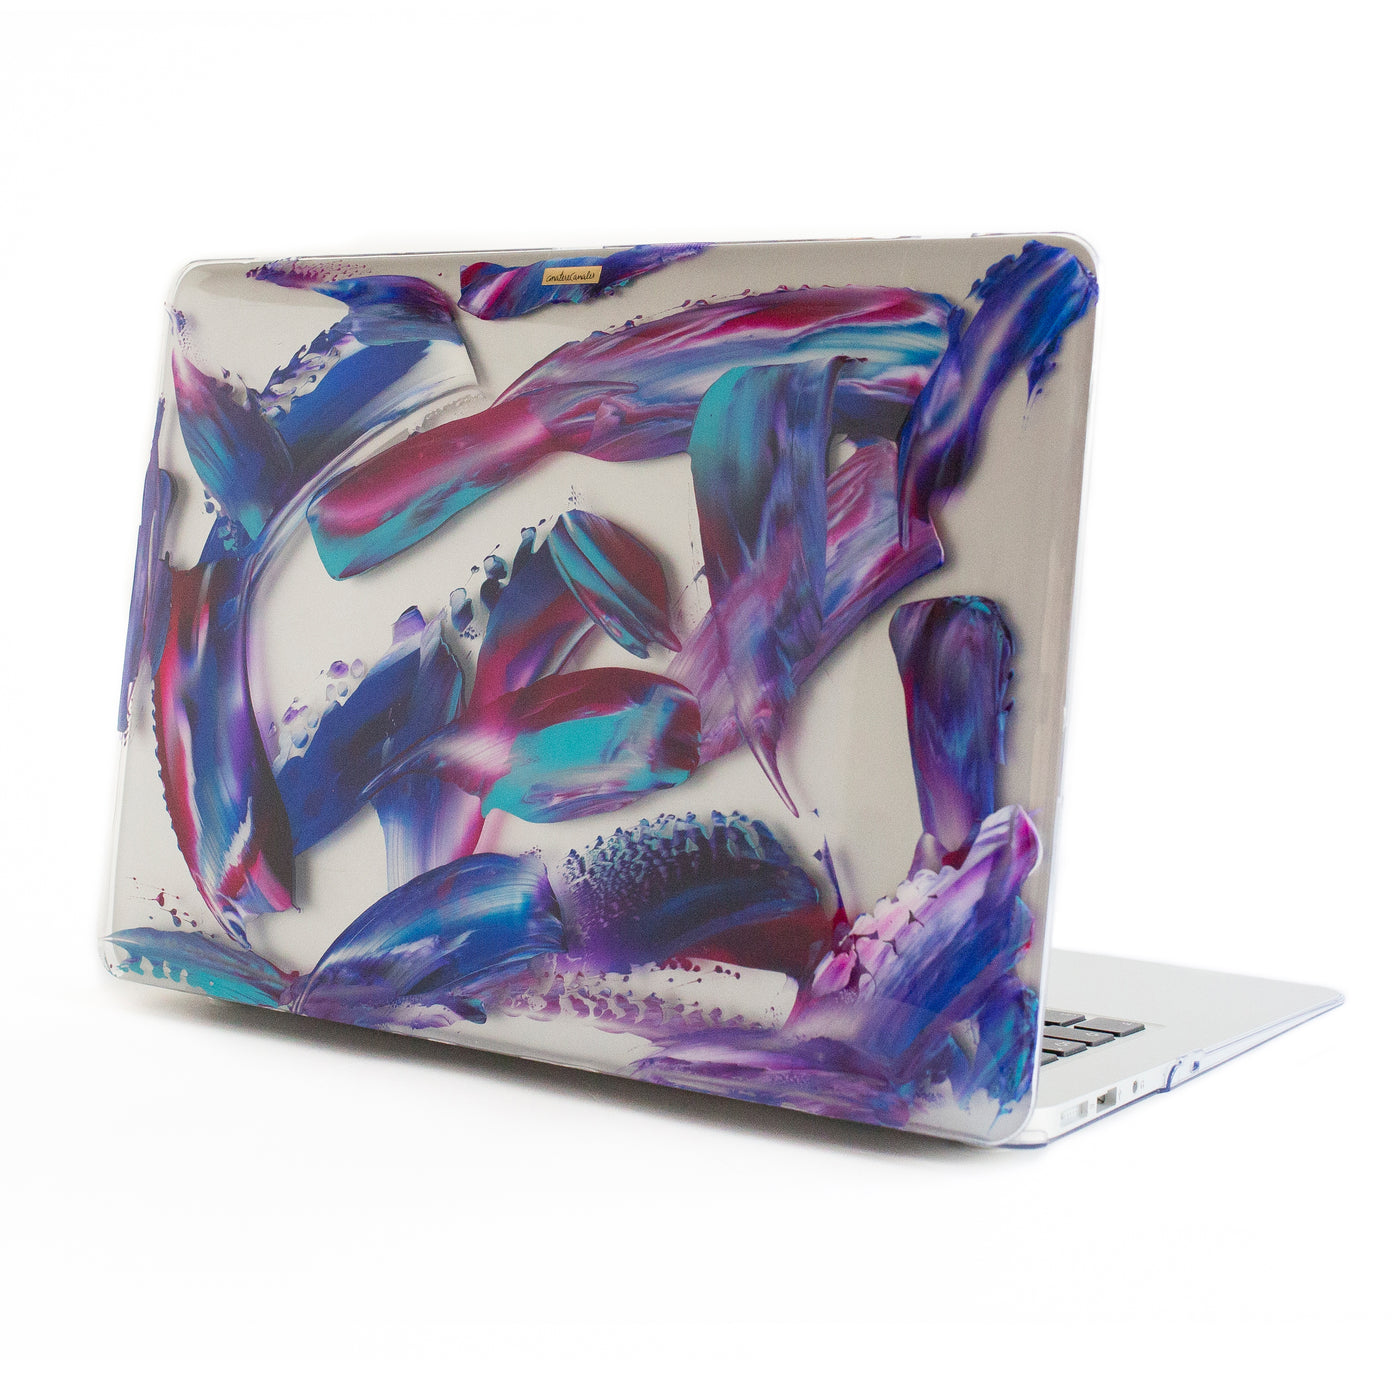 Paint Me Violet Macbook - Ana Tere Canales